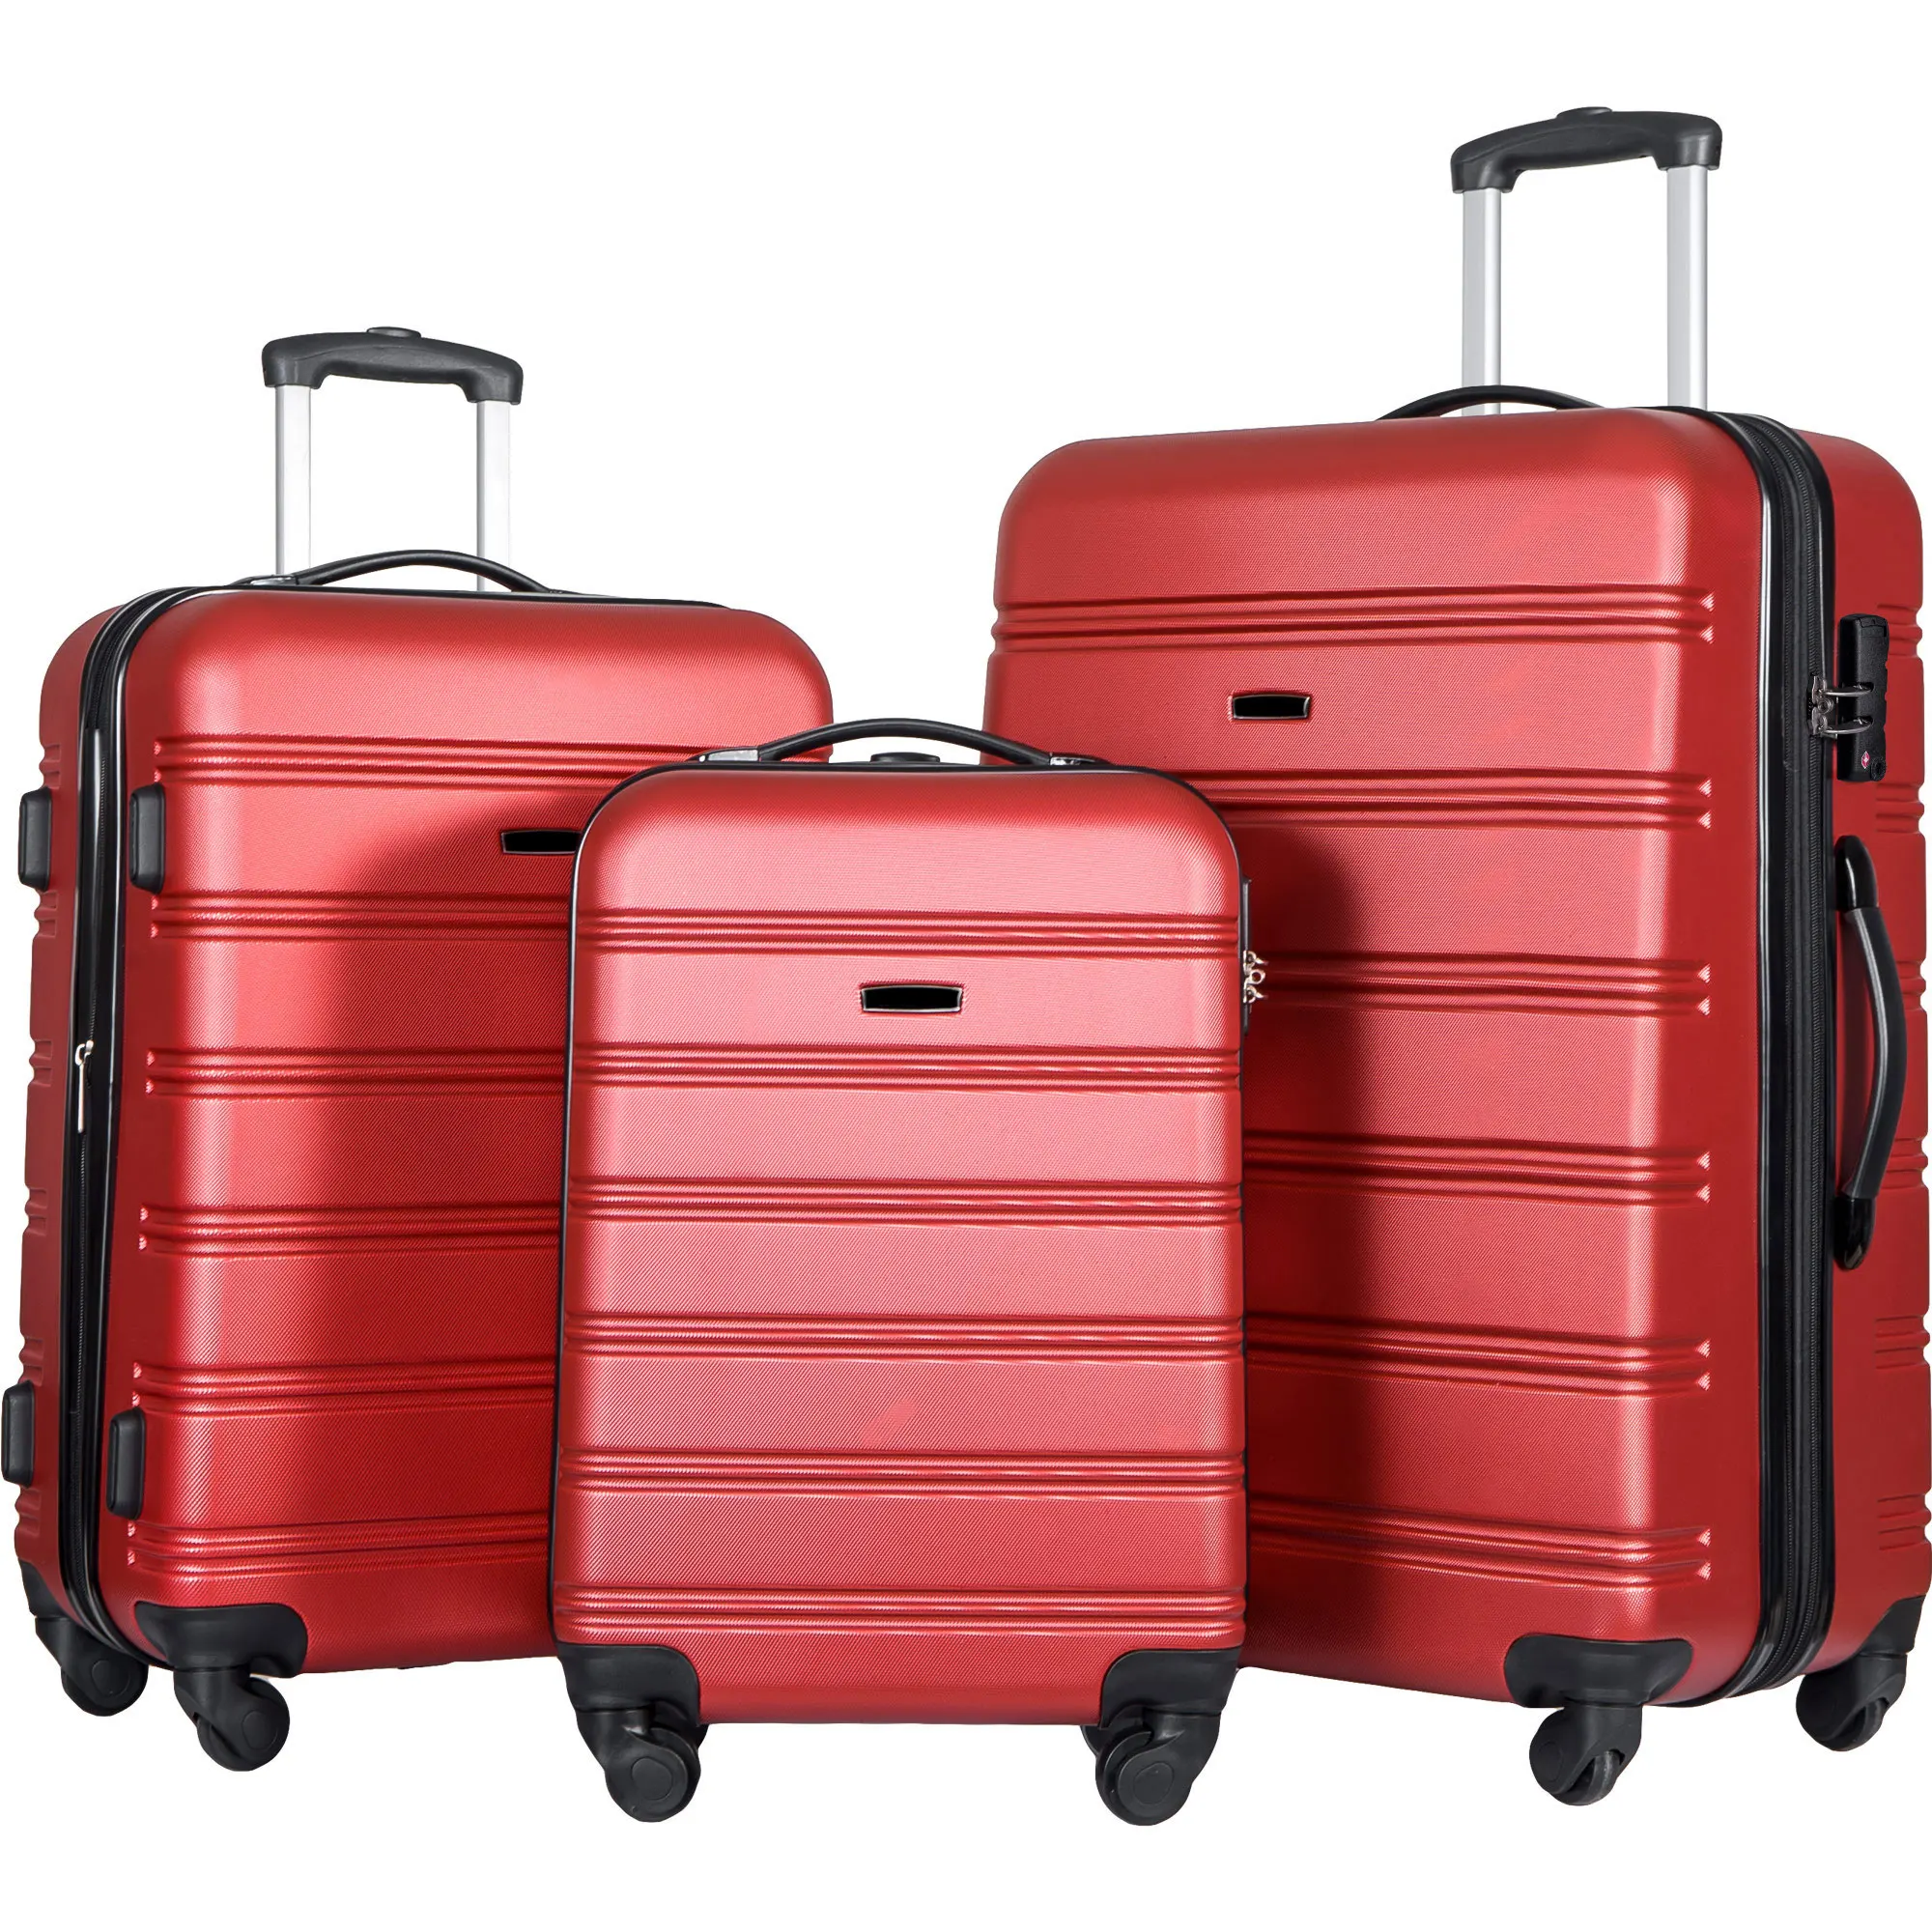 

3 Piece Luggage Set Hardside Spinner Suitcase with TSA Lock 20" 24' 28" Available, Red